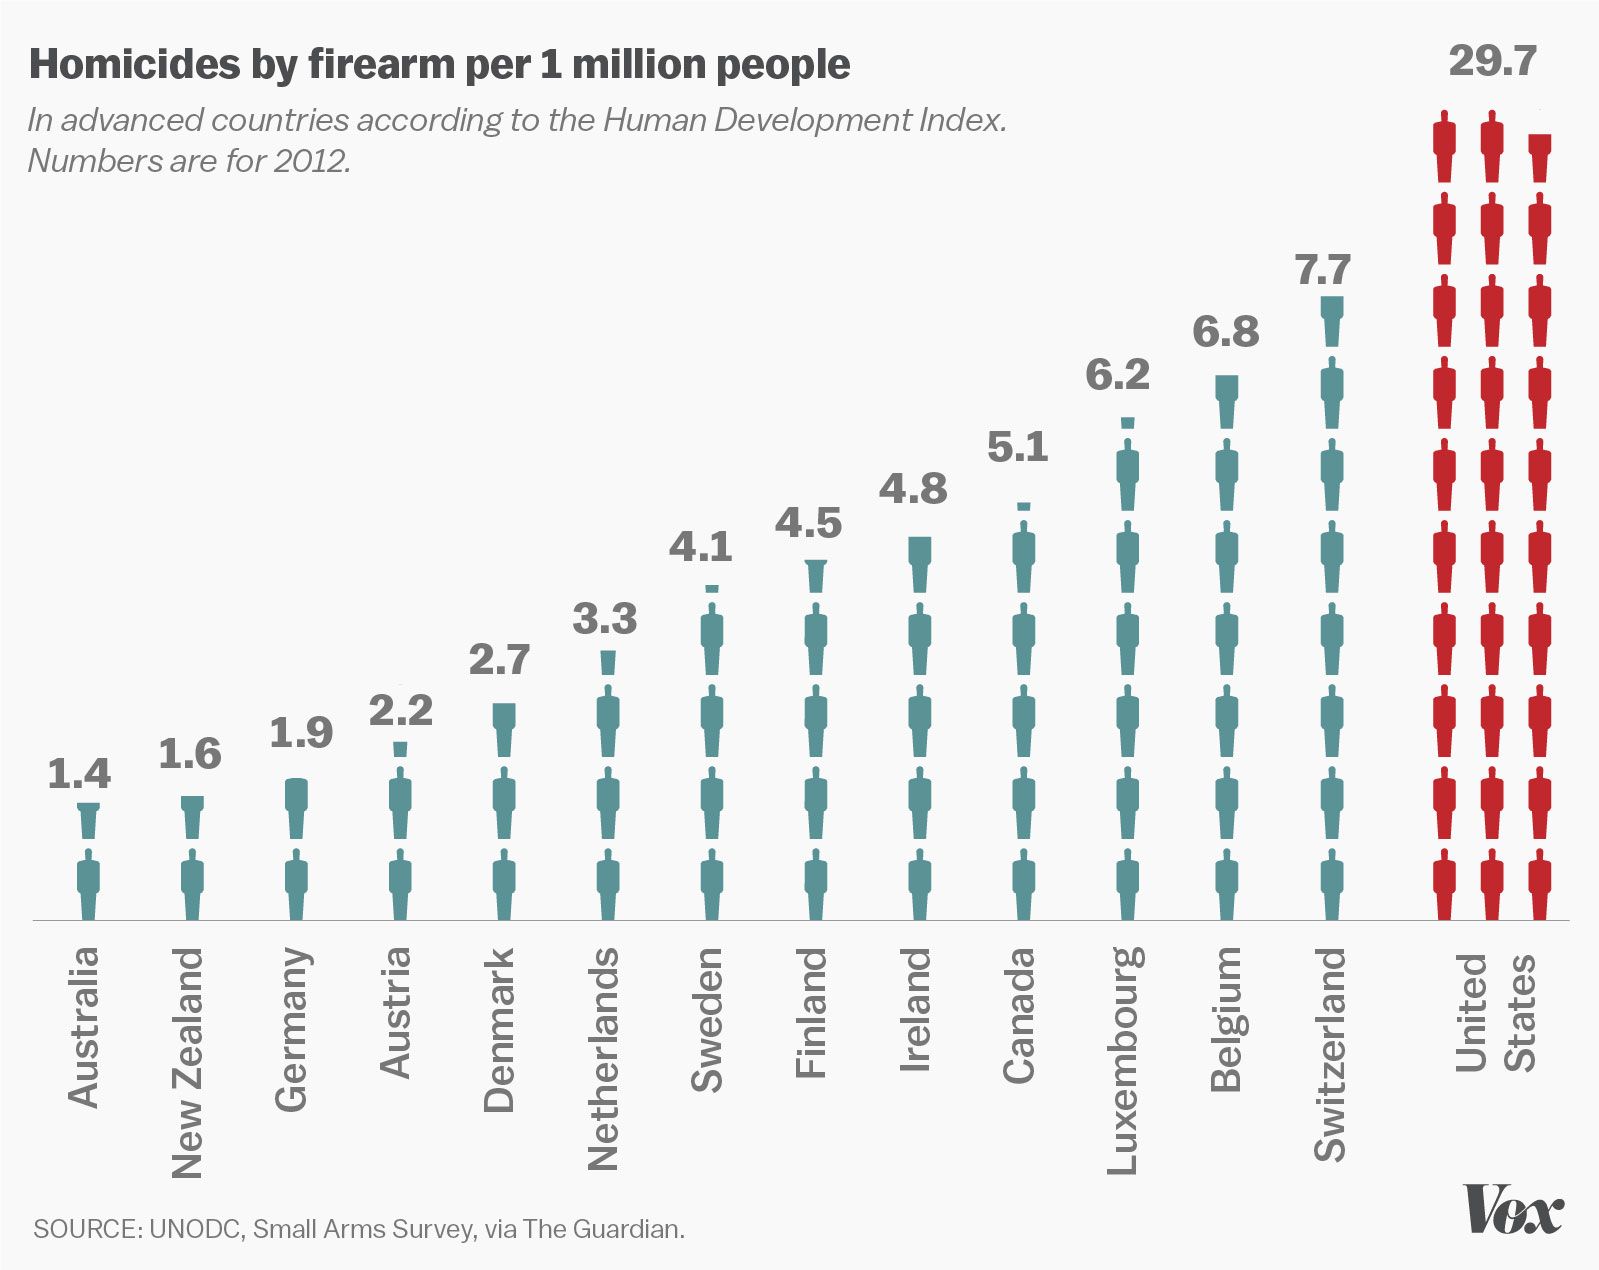 America has far more gun homicides than other developed countries.